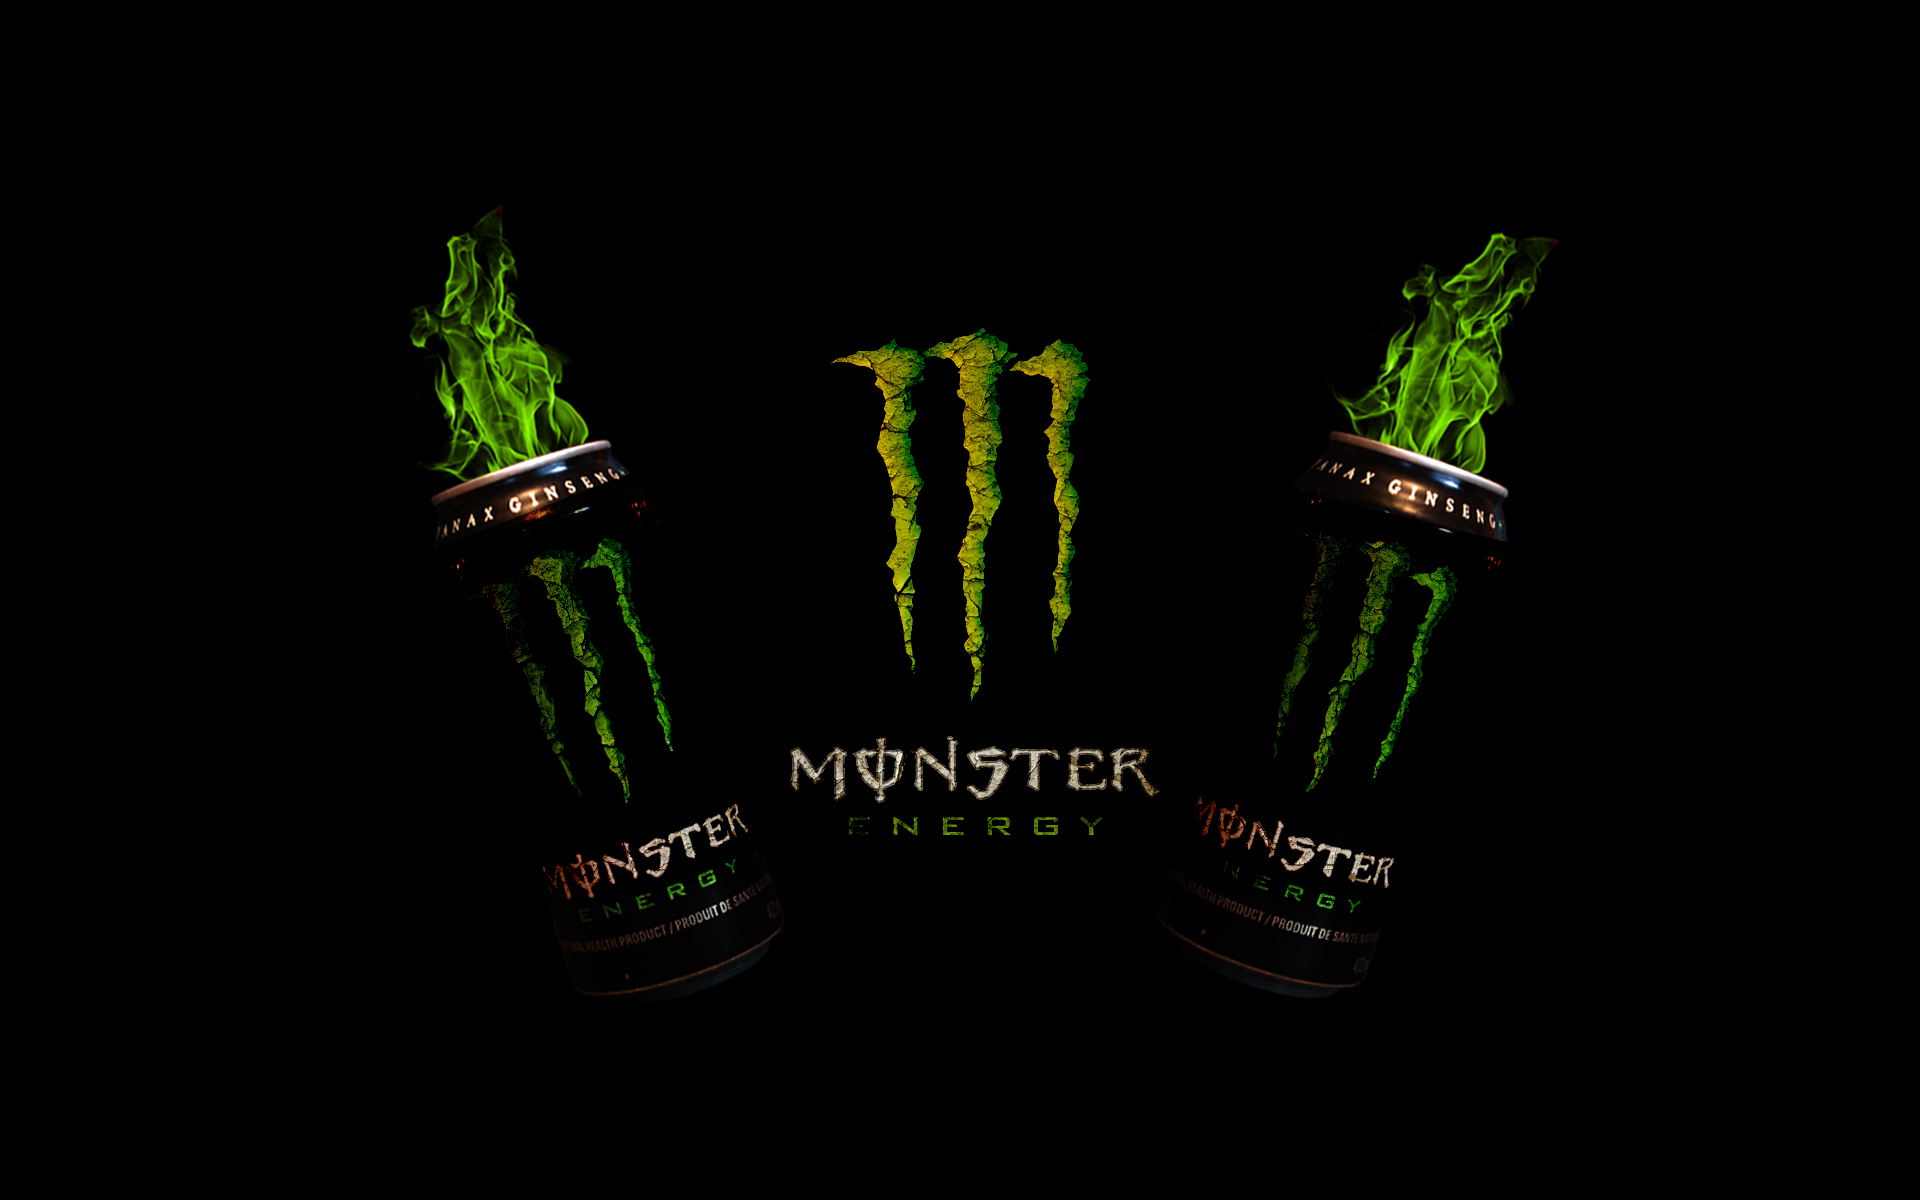 Monster Energy Drink Wallpaper Background Image. View, download, comment, and rate. Monster energy drink, Monster energy, Monster